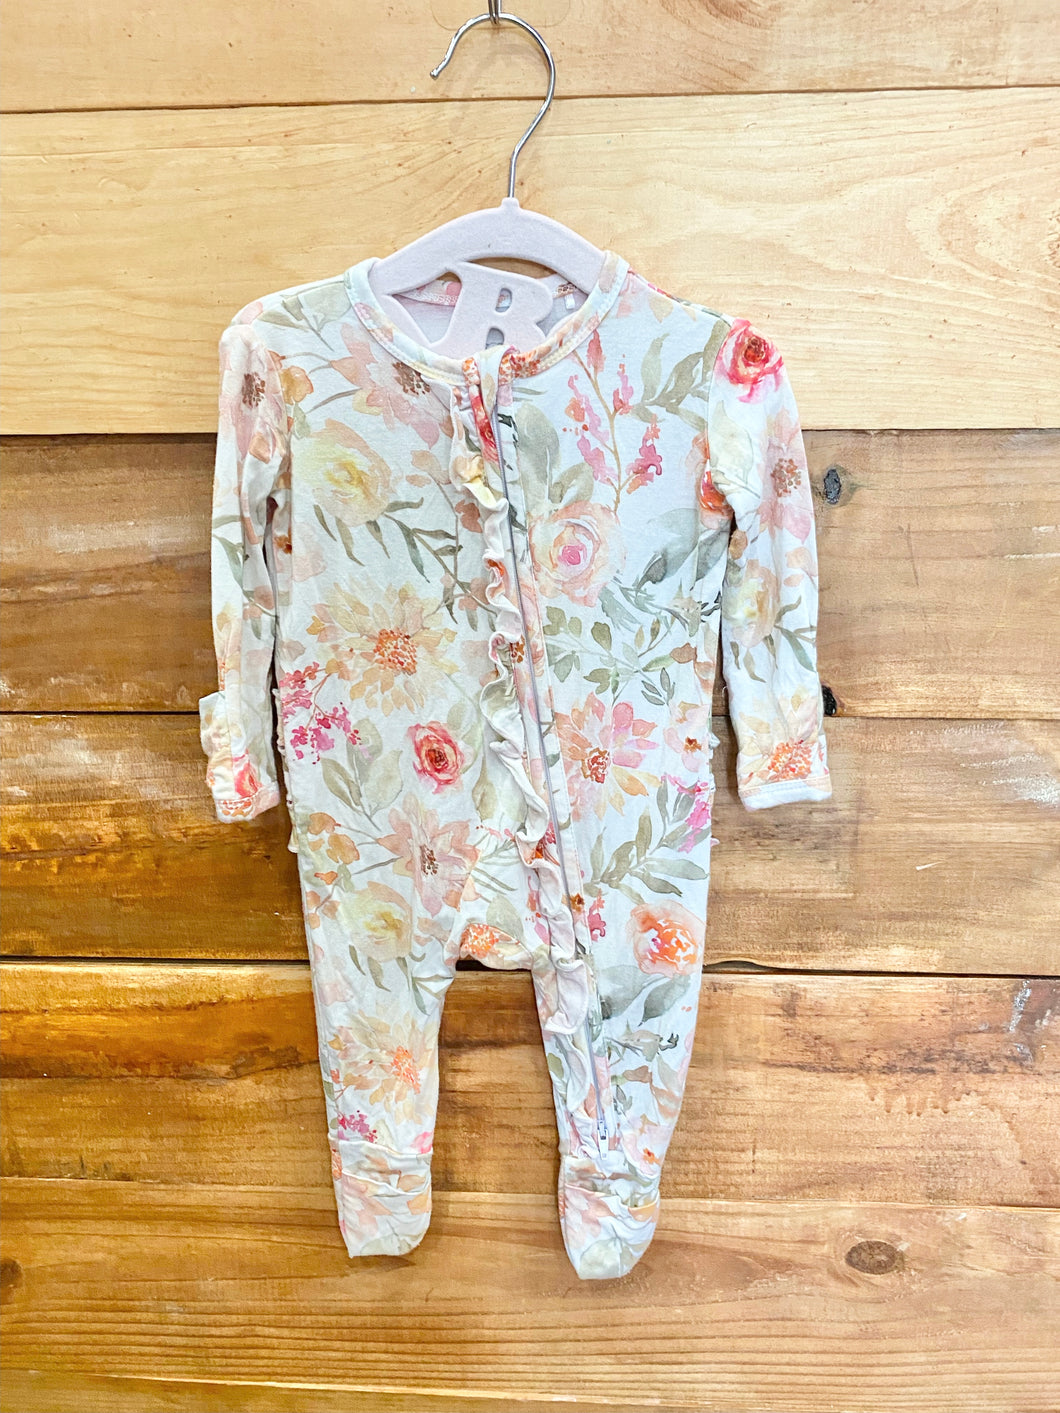 Little Snuggles Floral Sleeper Size 0-3m